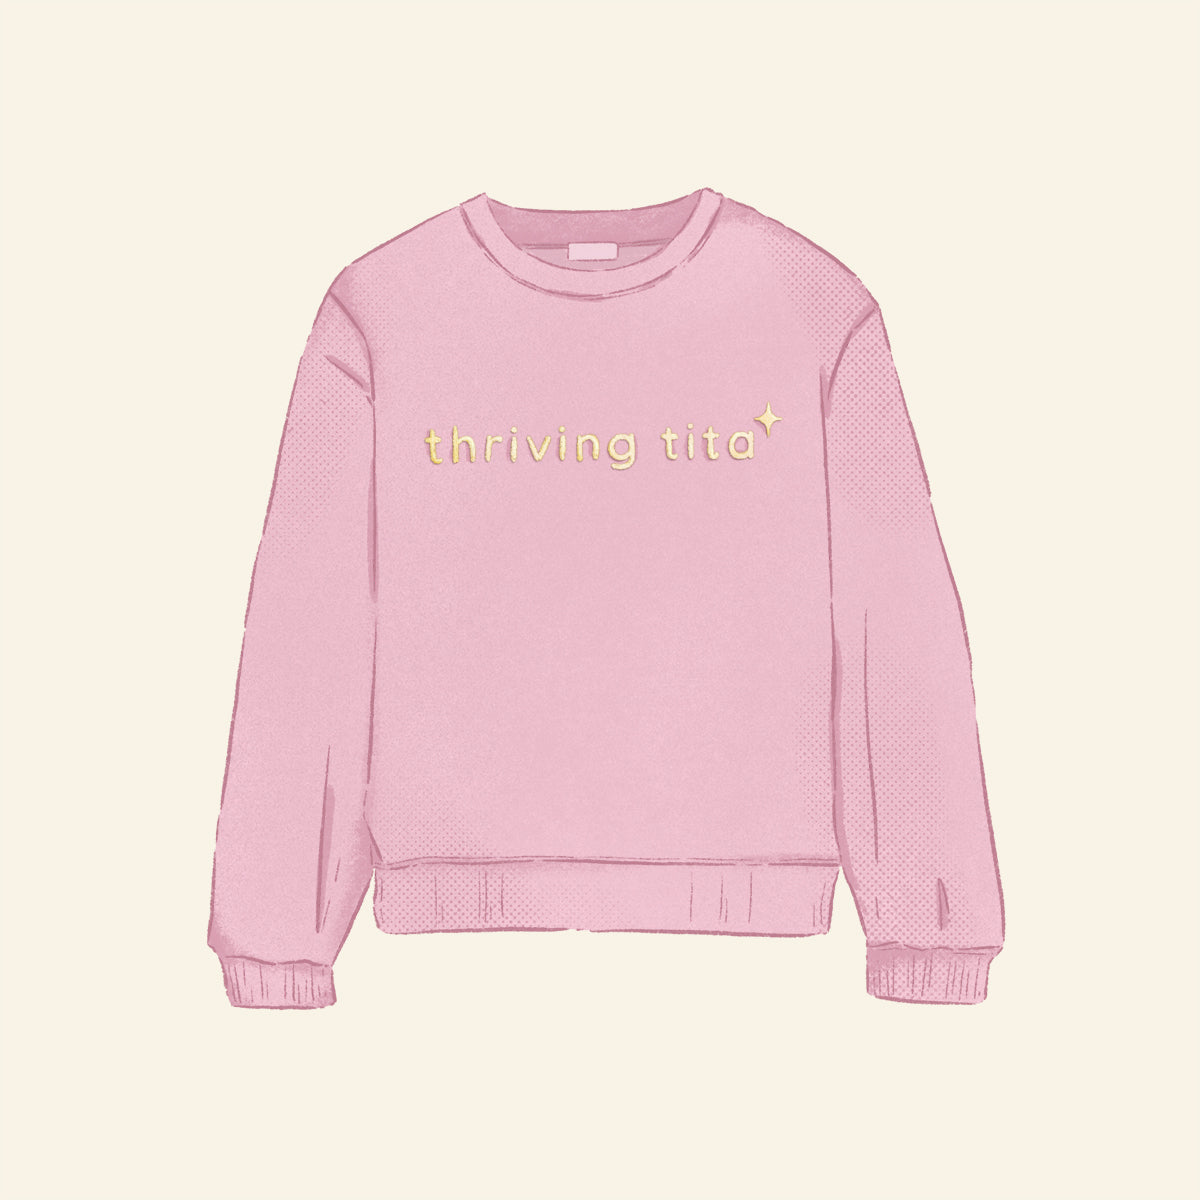 'thriving tita' pullover [limited edition]